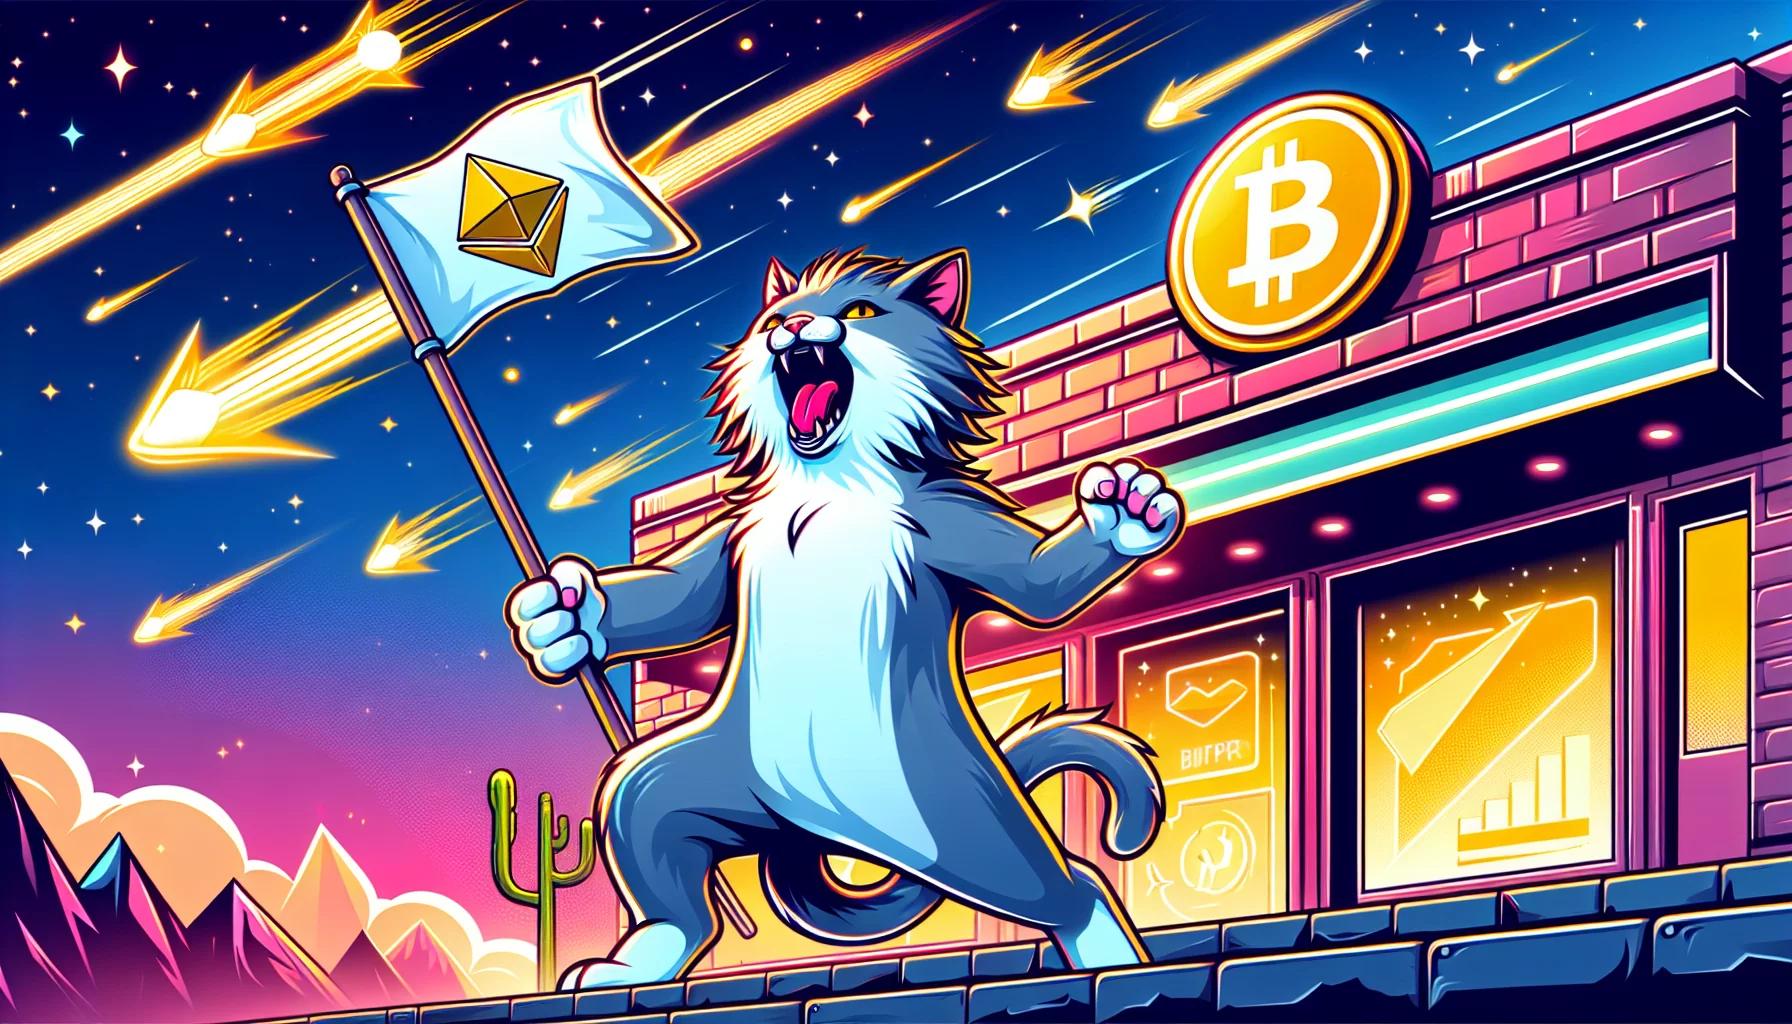 Roaring kitty's gamestop run and bitcoin's skyrocketing interest highlight an eventful week in cryptocurrency